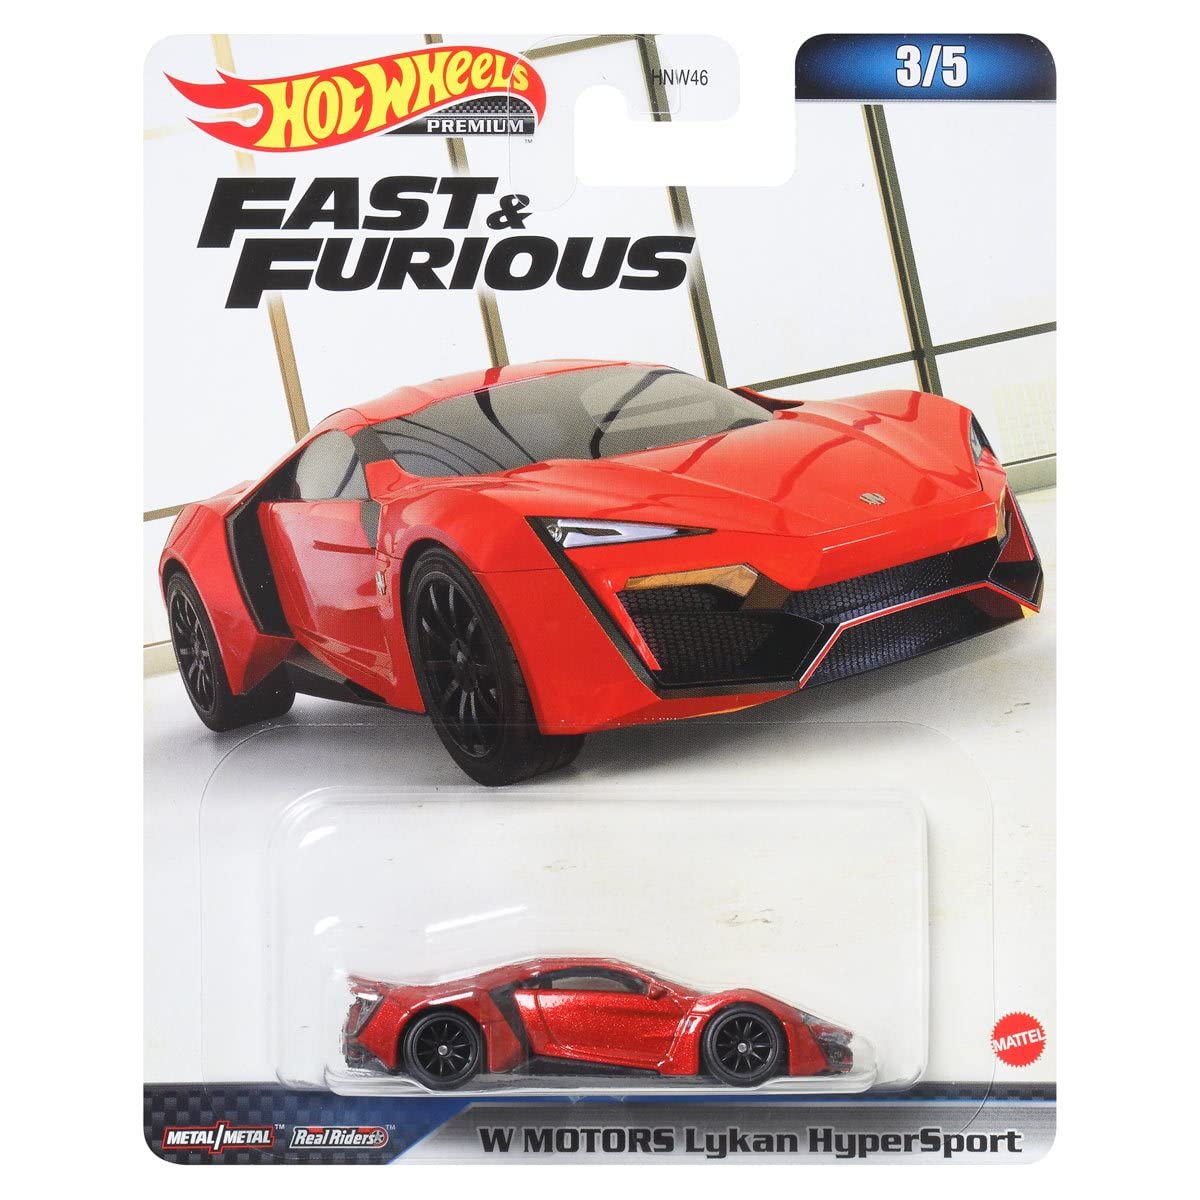 Hot Wheels Fast and Furious 1:64 W Motors Lykan HyperSport [Ages 3 and Up]